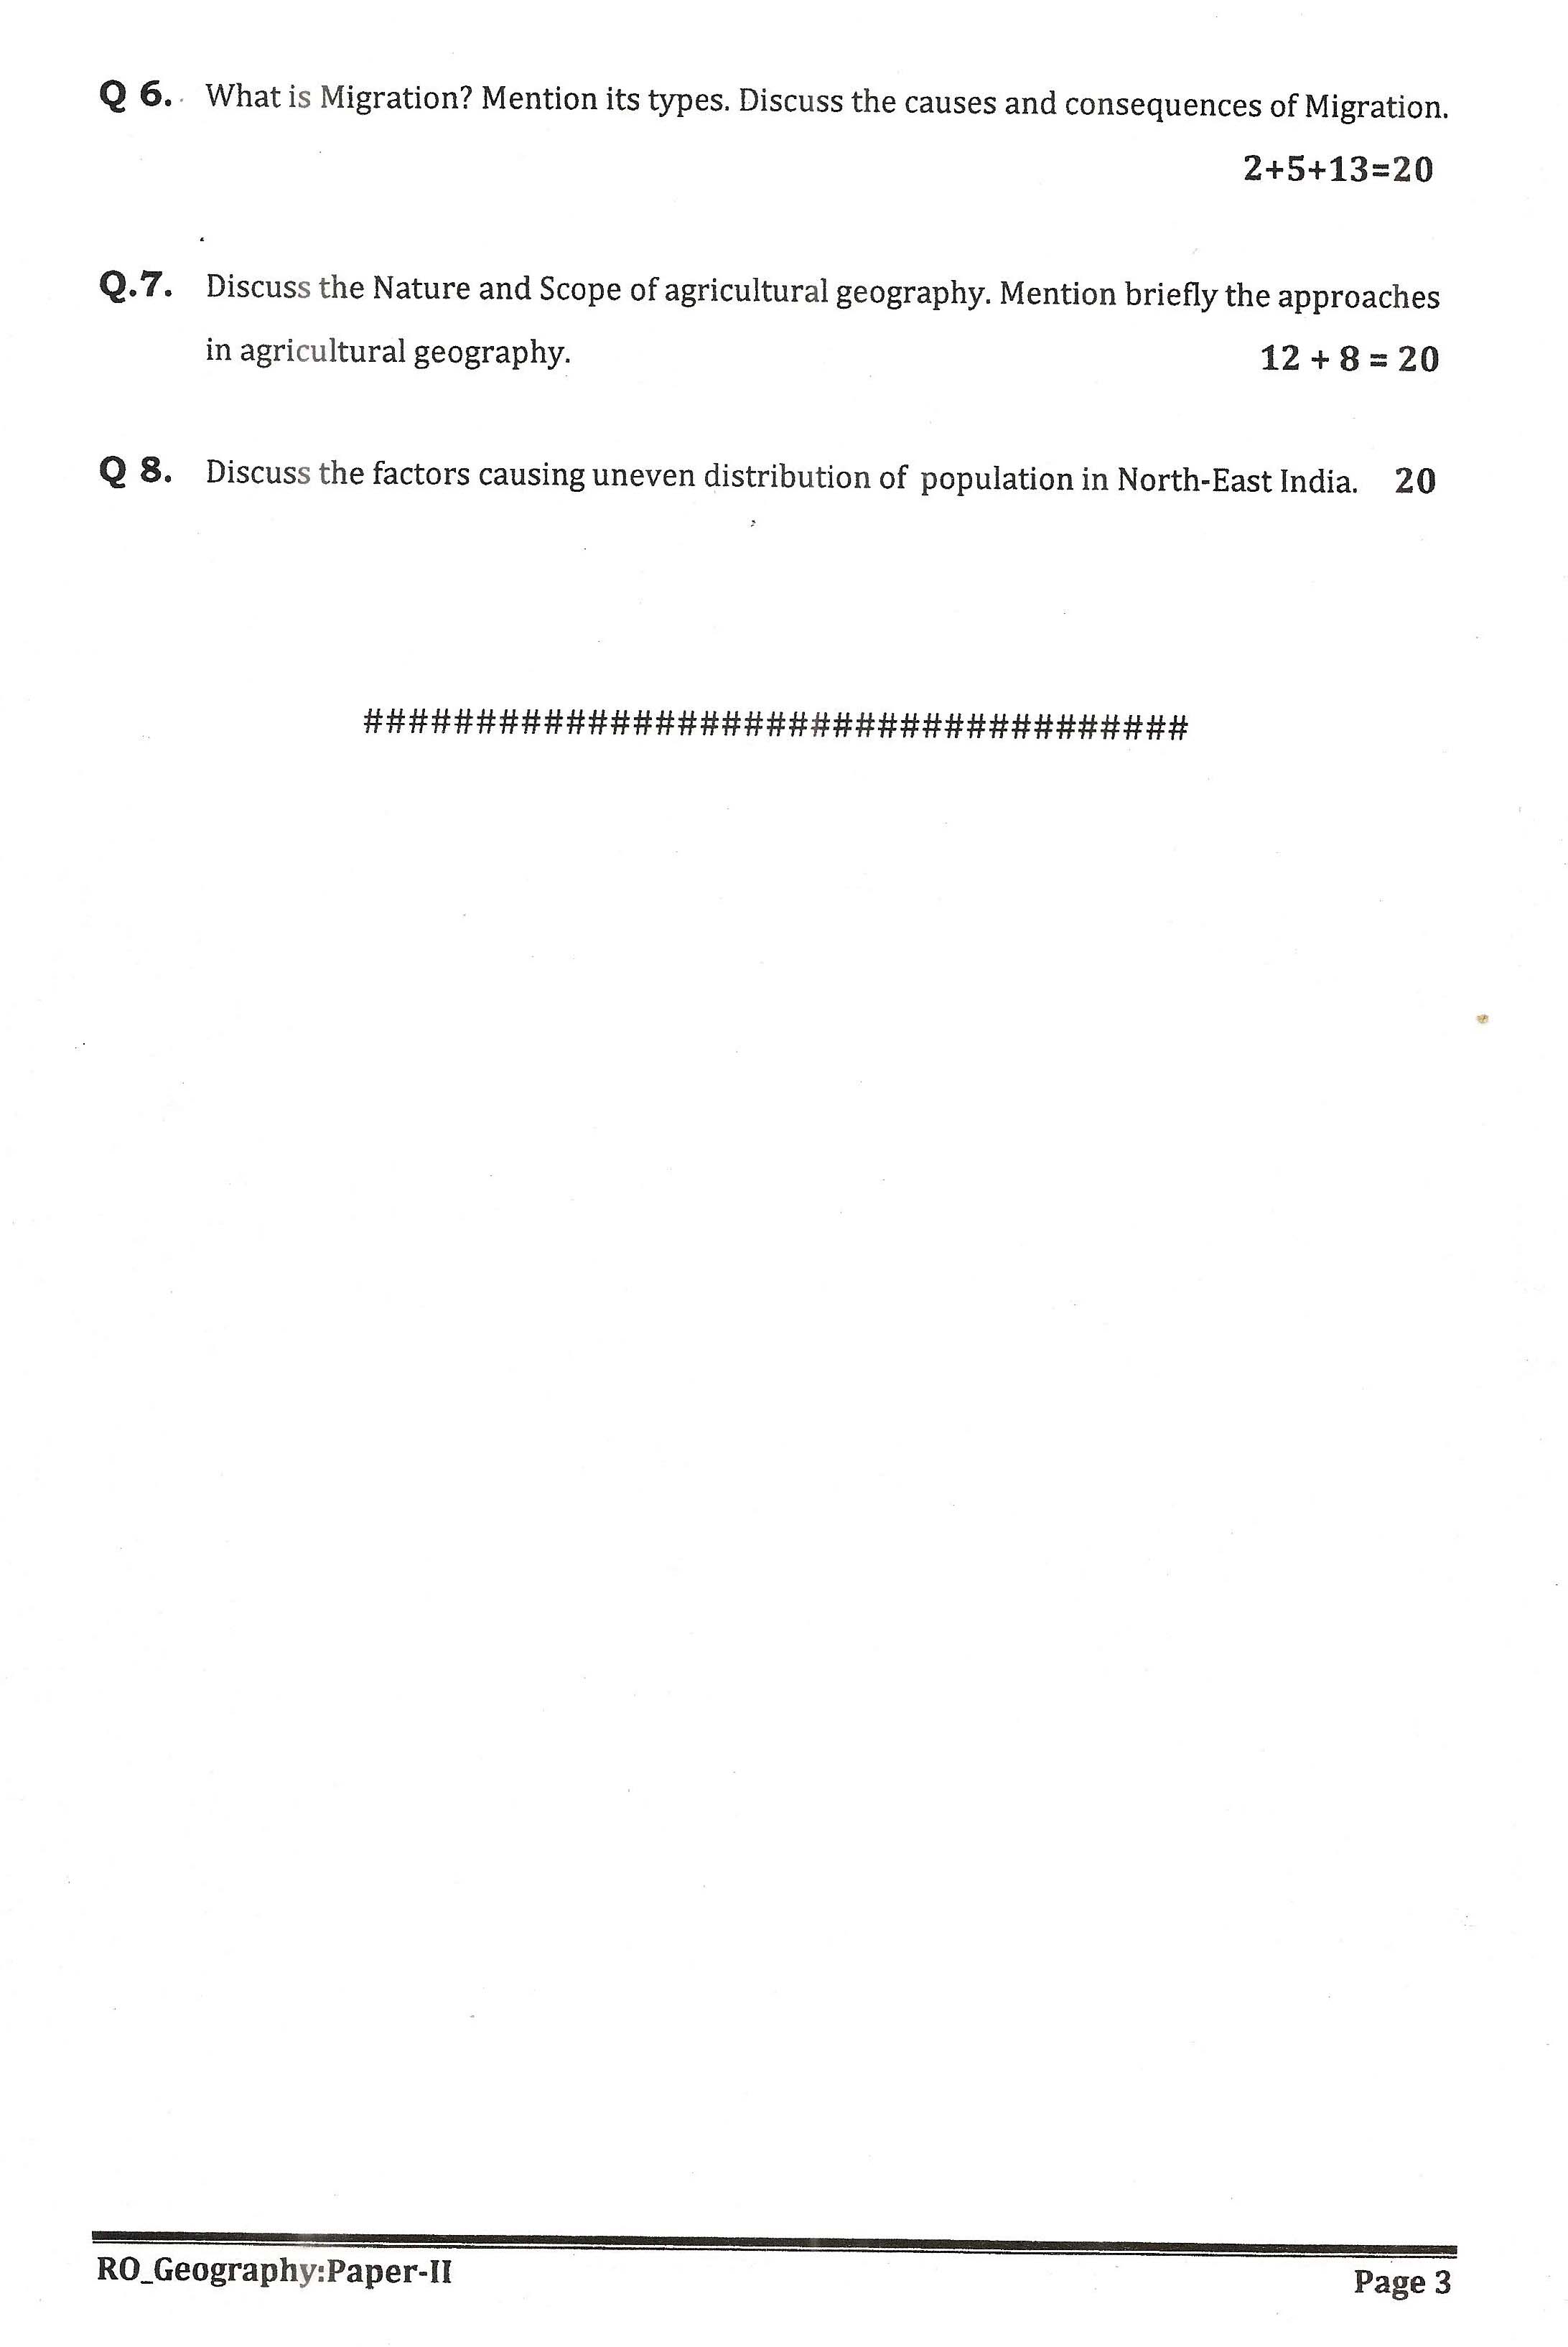 APPSC Research Officer Geography Paper II Exam Question Paper 2014 3